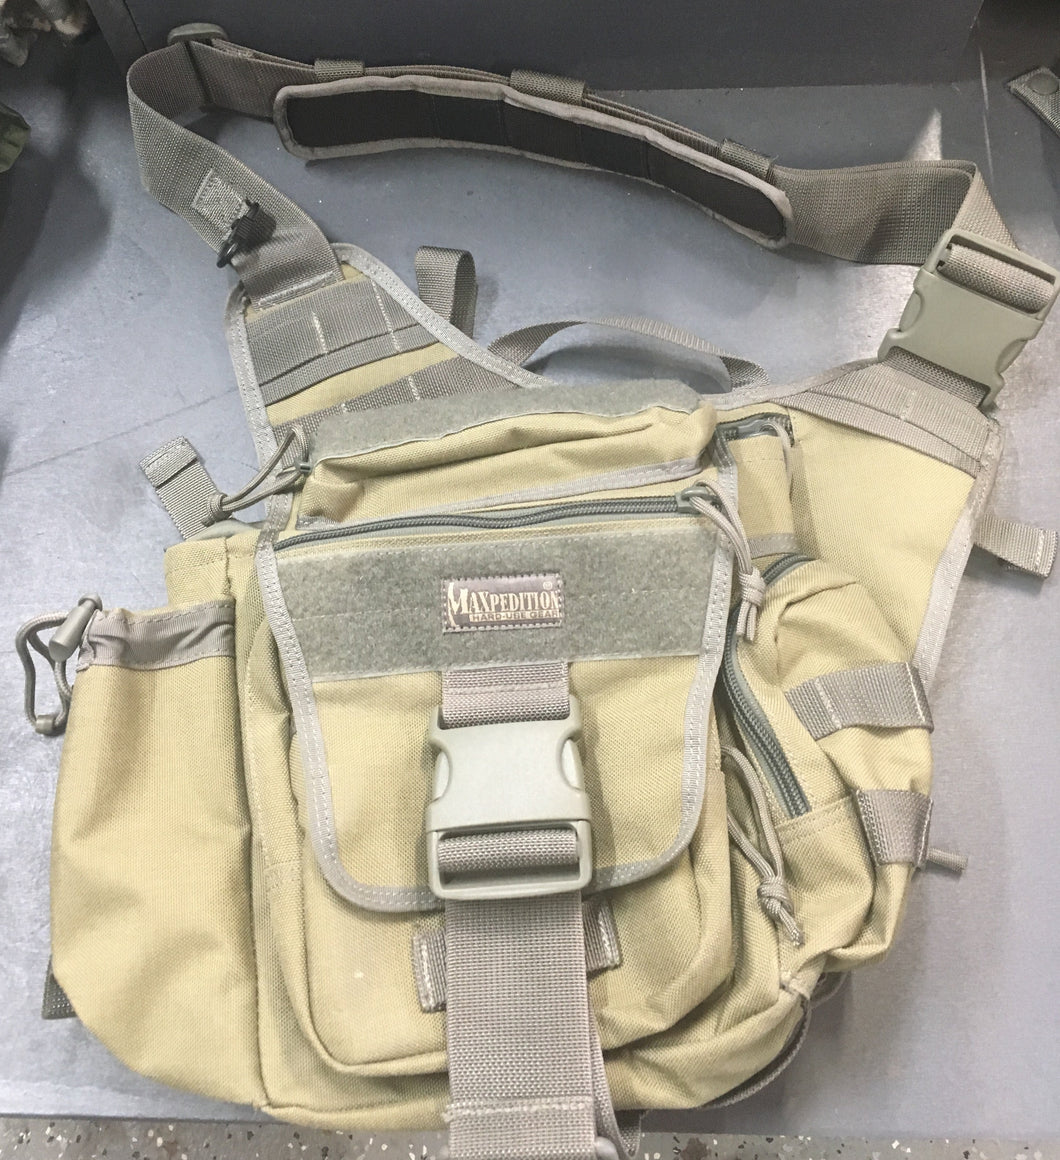 FRONT VIEW MAXPEDITION GEAR BAG